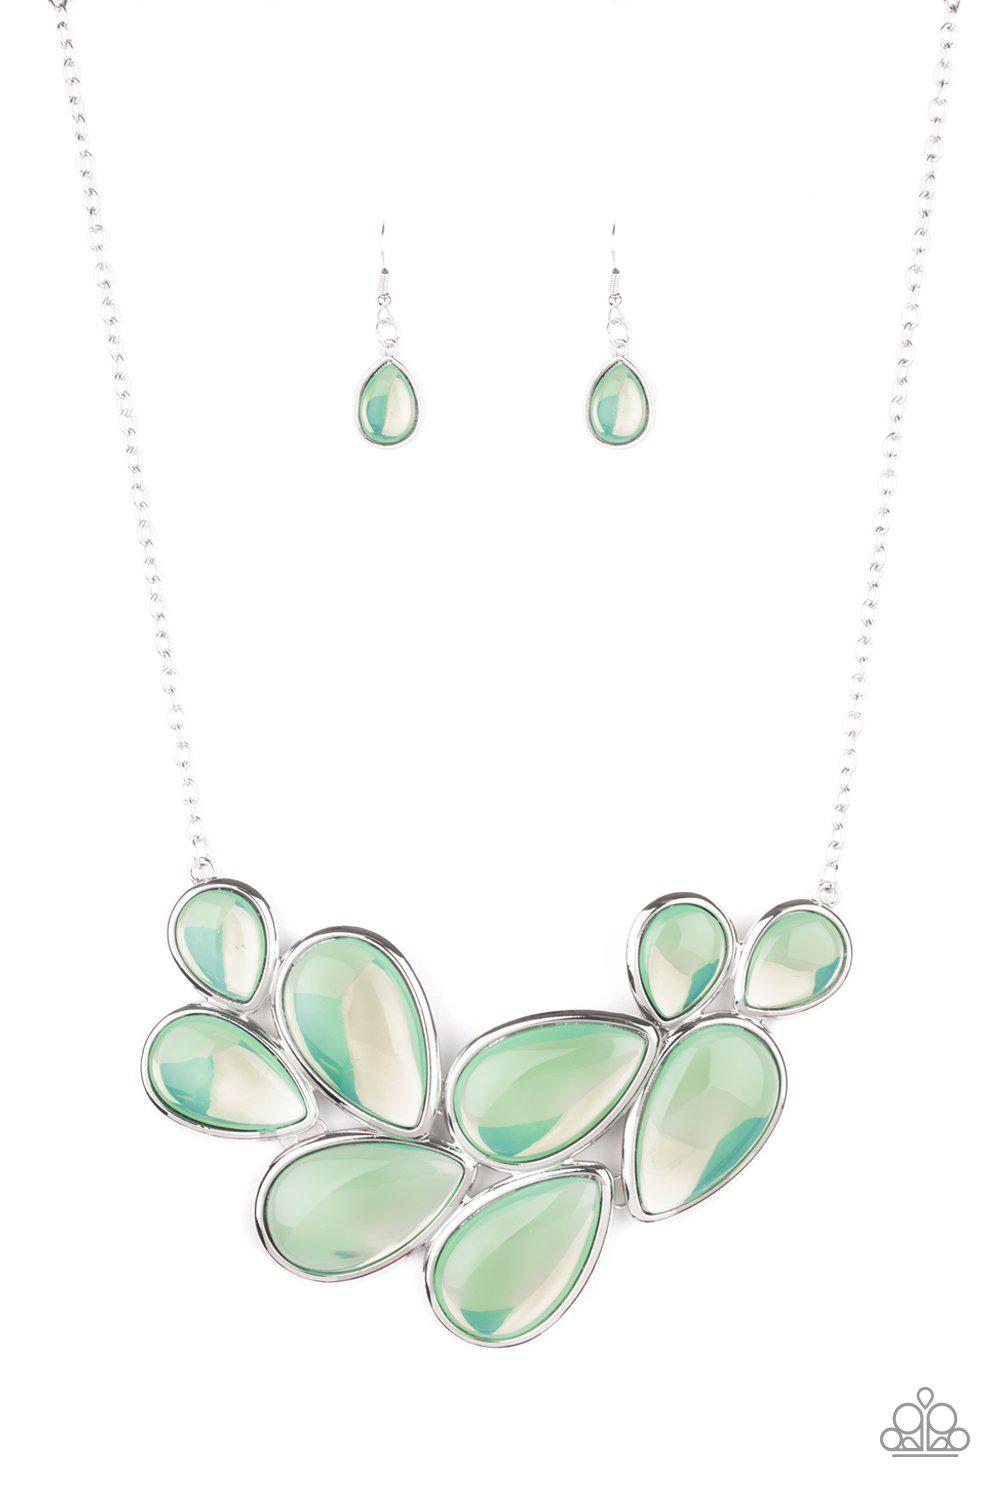 Iridescently Irresistible Green Necklace - Paparazzi Accessories - lightbox -CarasShop.com - $5 Jewelry by Cara Jewels